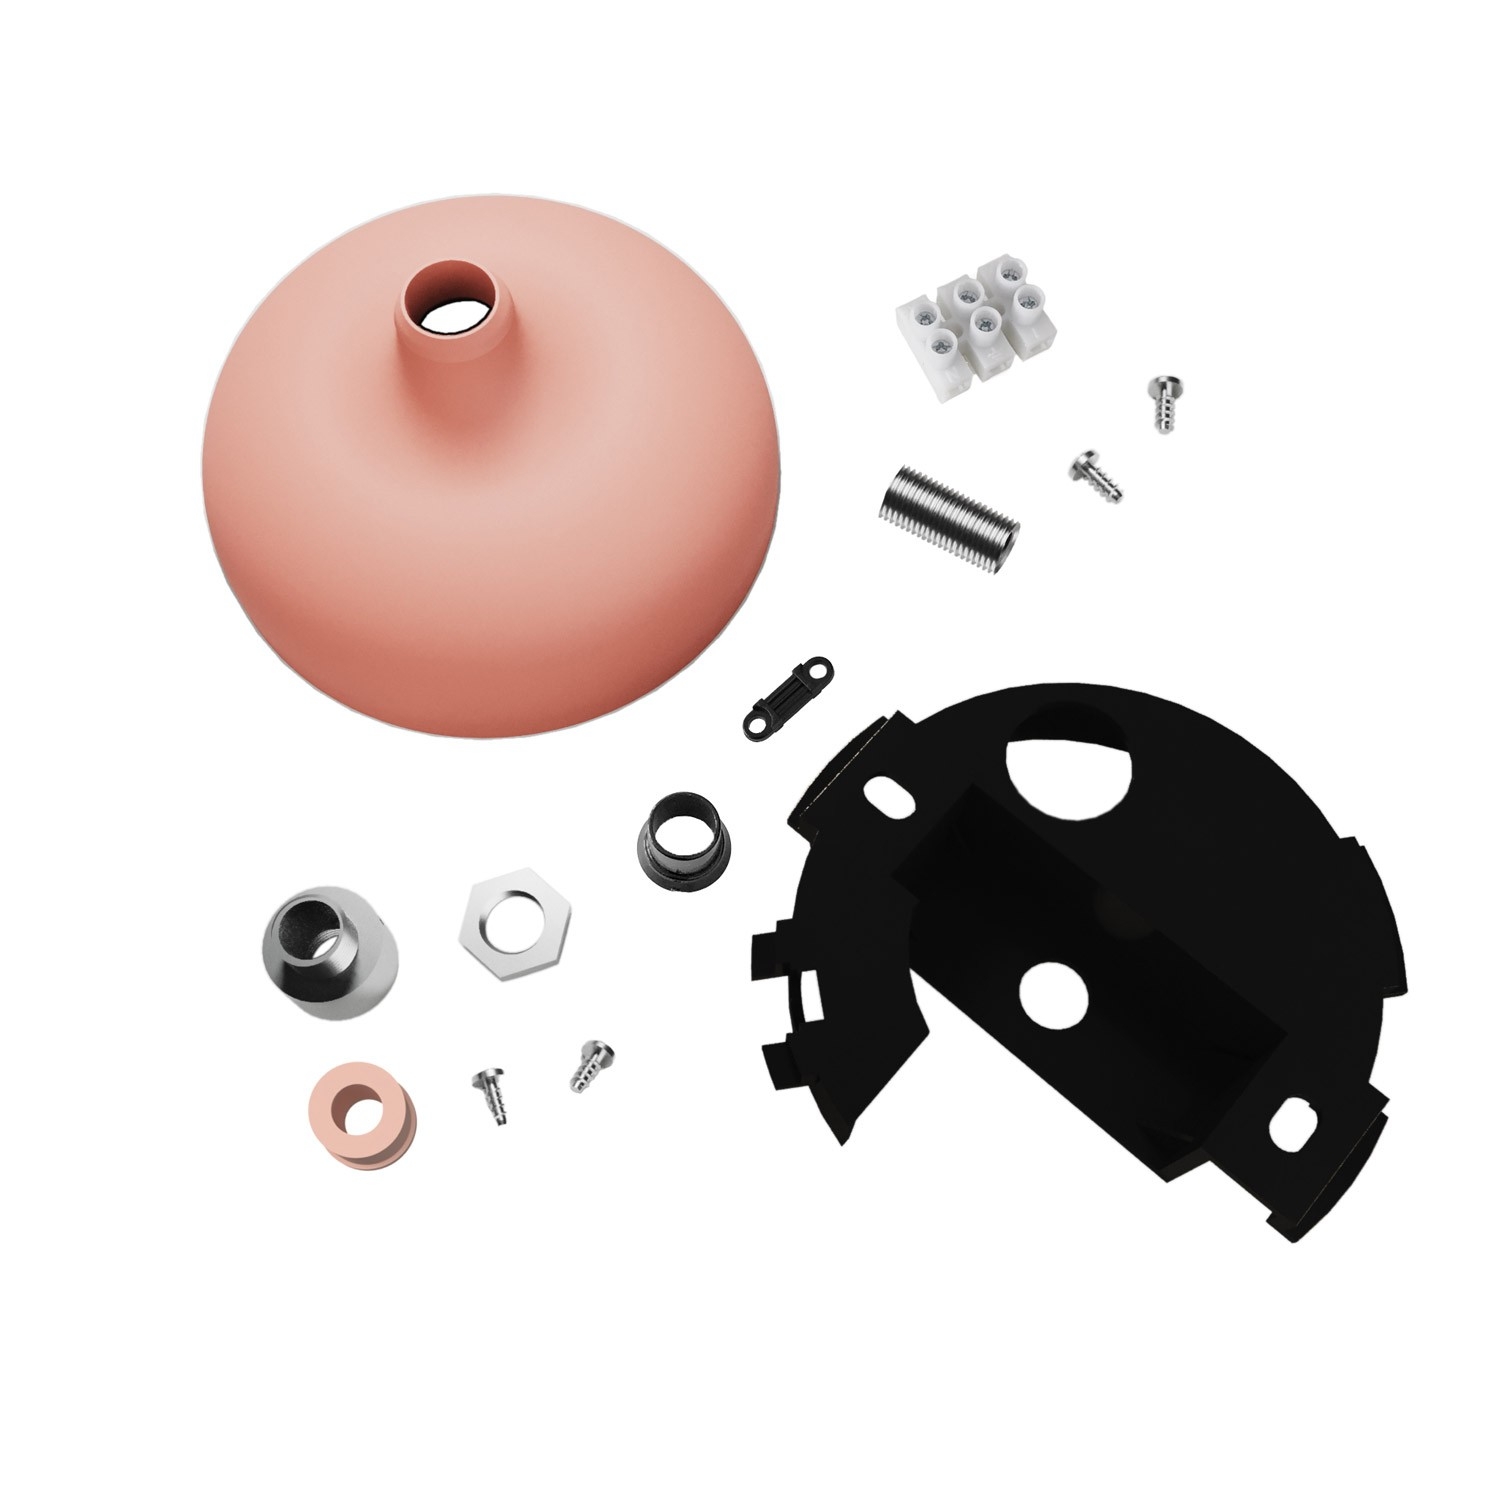 Silicone rose kit with central hole suitable for lampshade